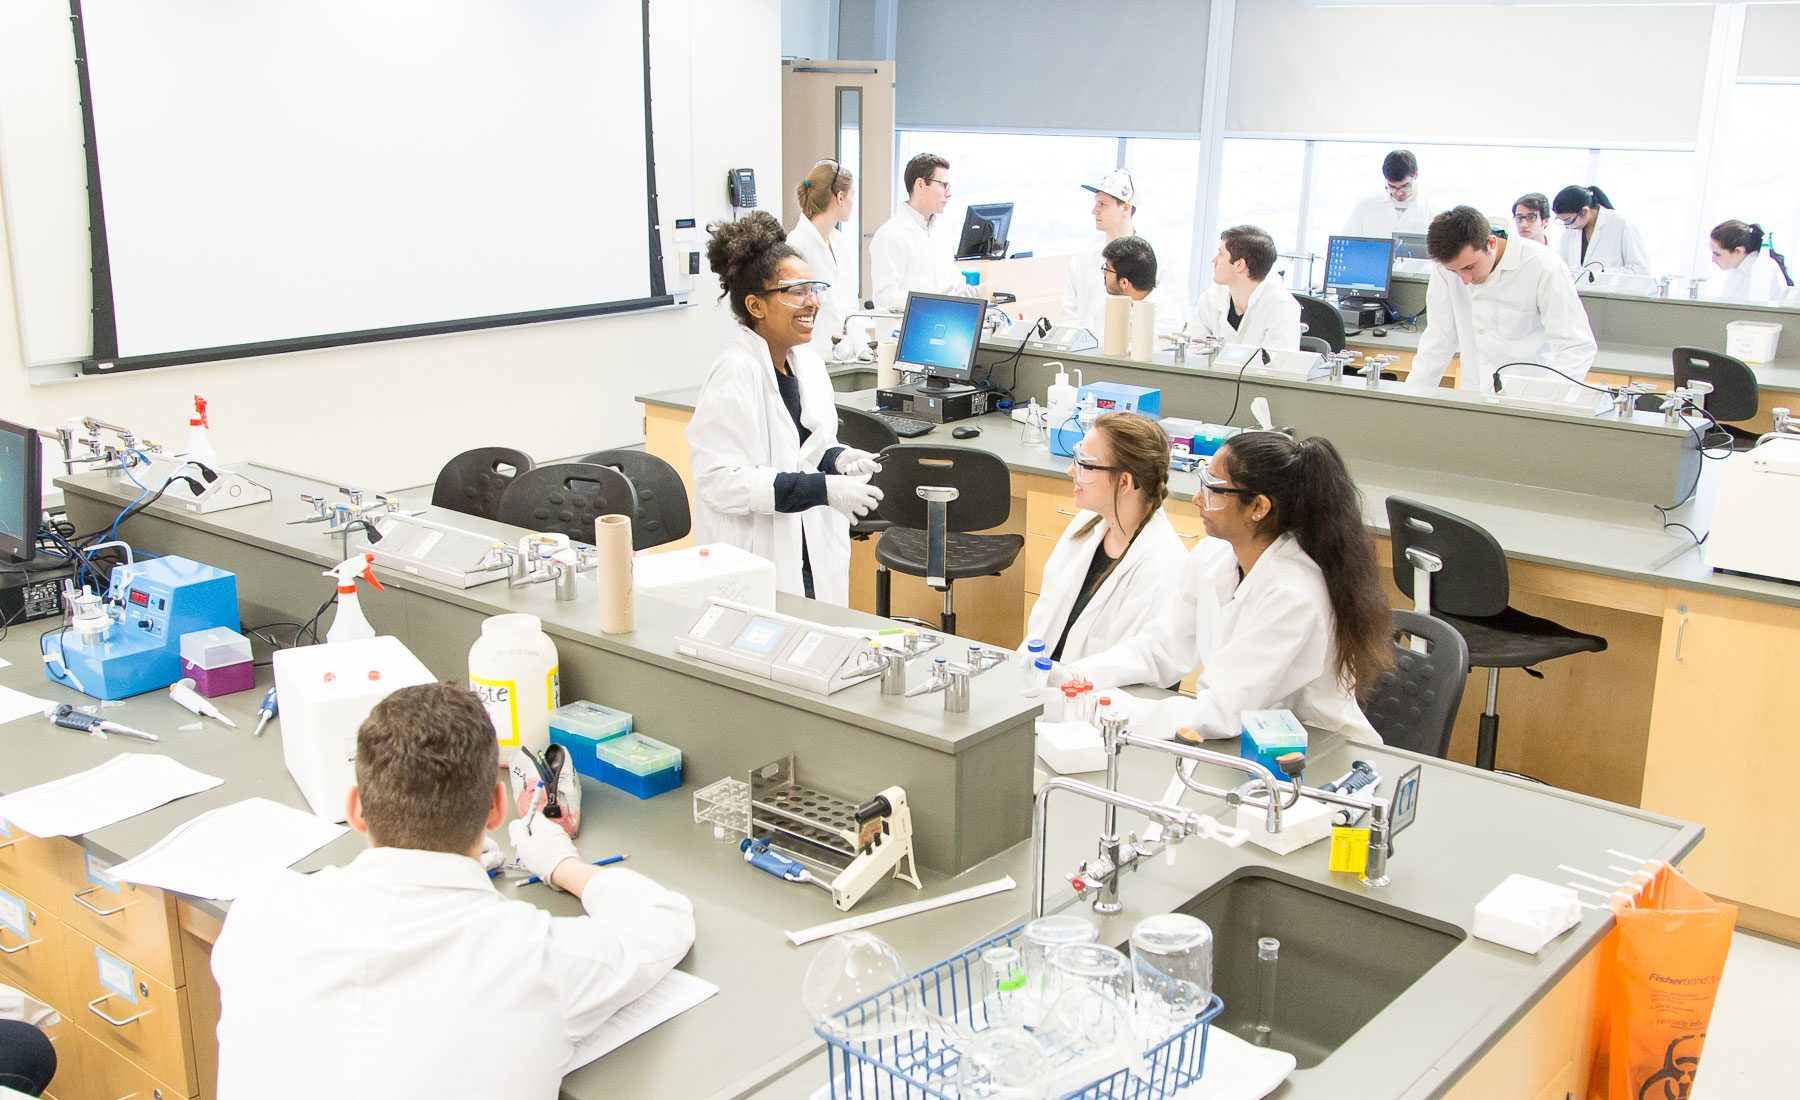 Students learning in a science lab during class 